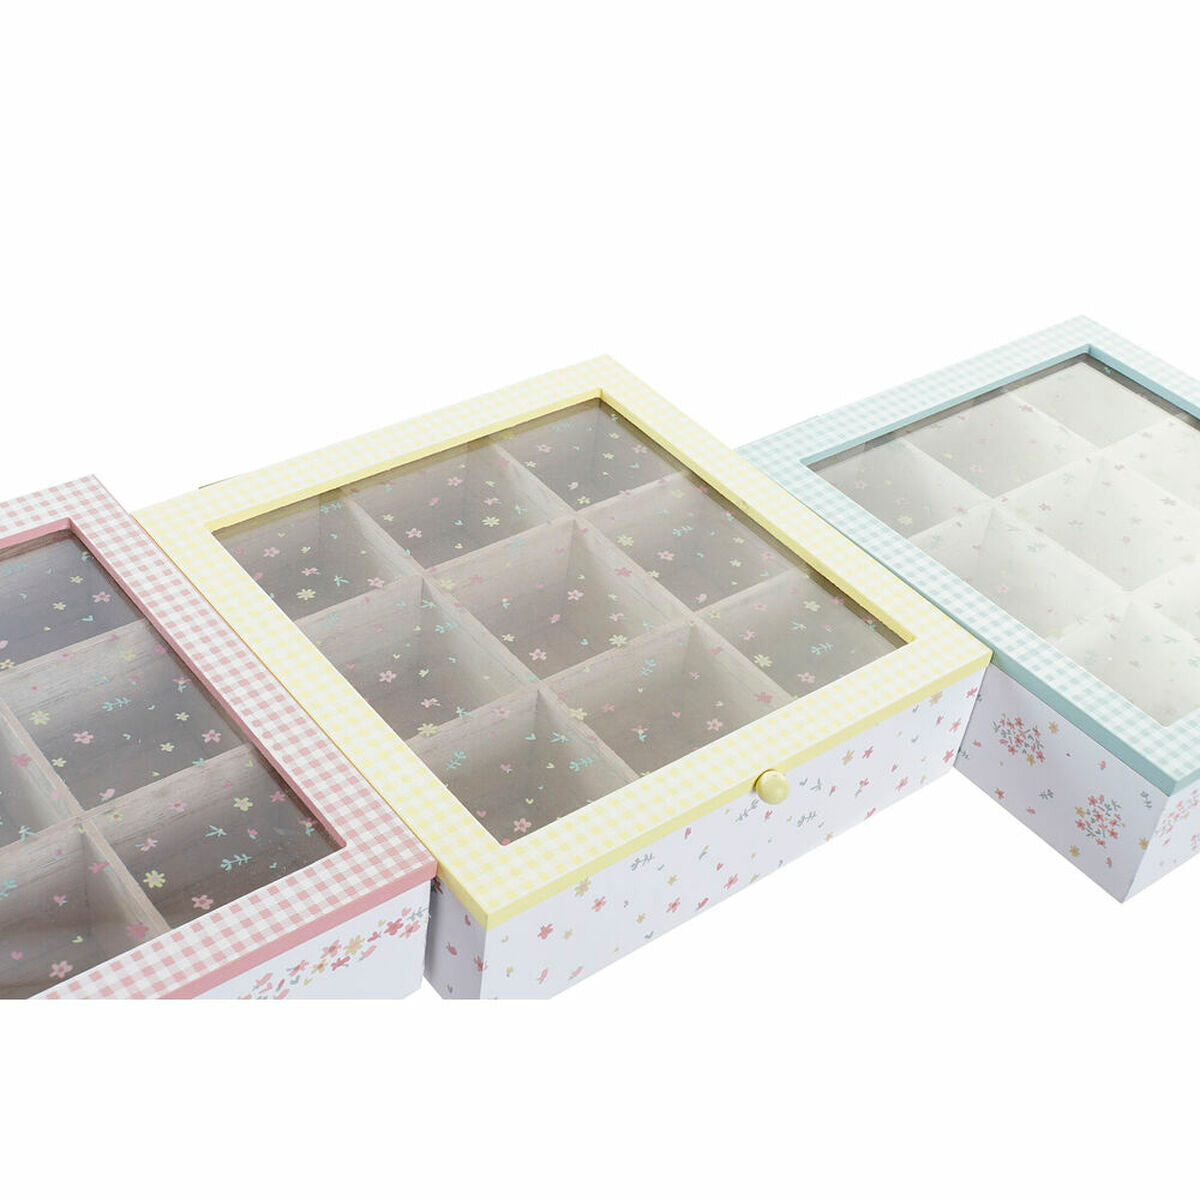 Box for Infusions DKD Home Decor Yellow Red Green Metal Crystal MDF Wood 3 Pieces 24 x 24 x 7 cm